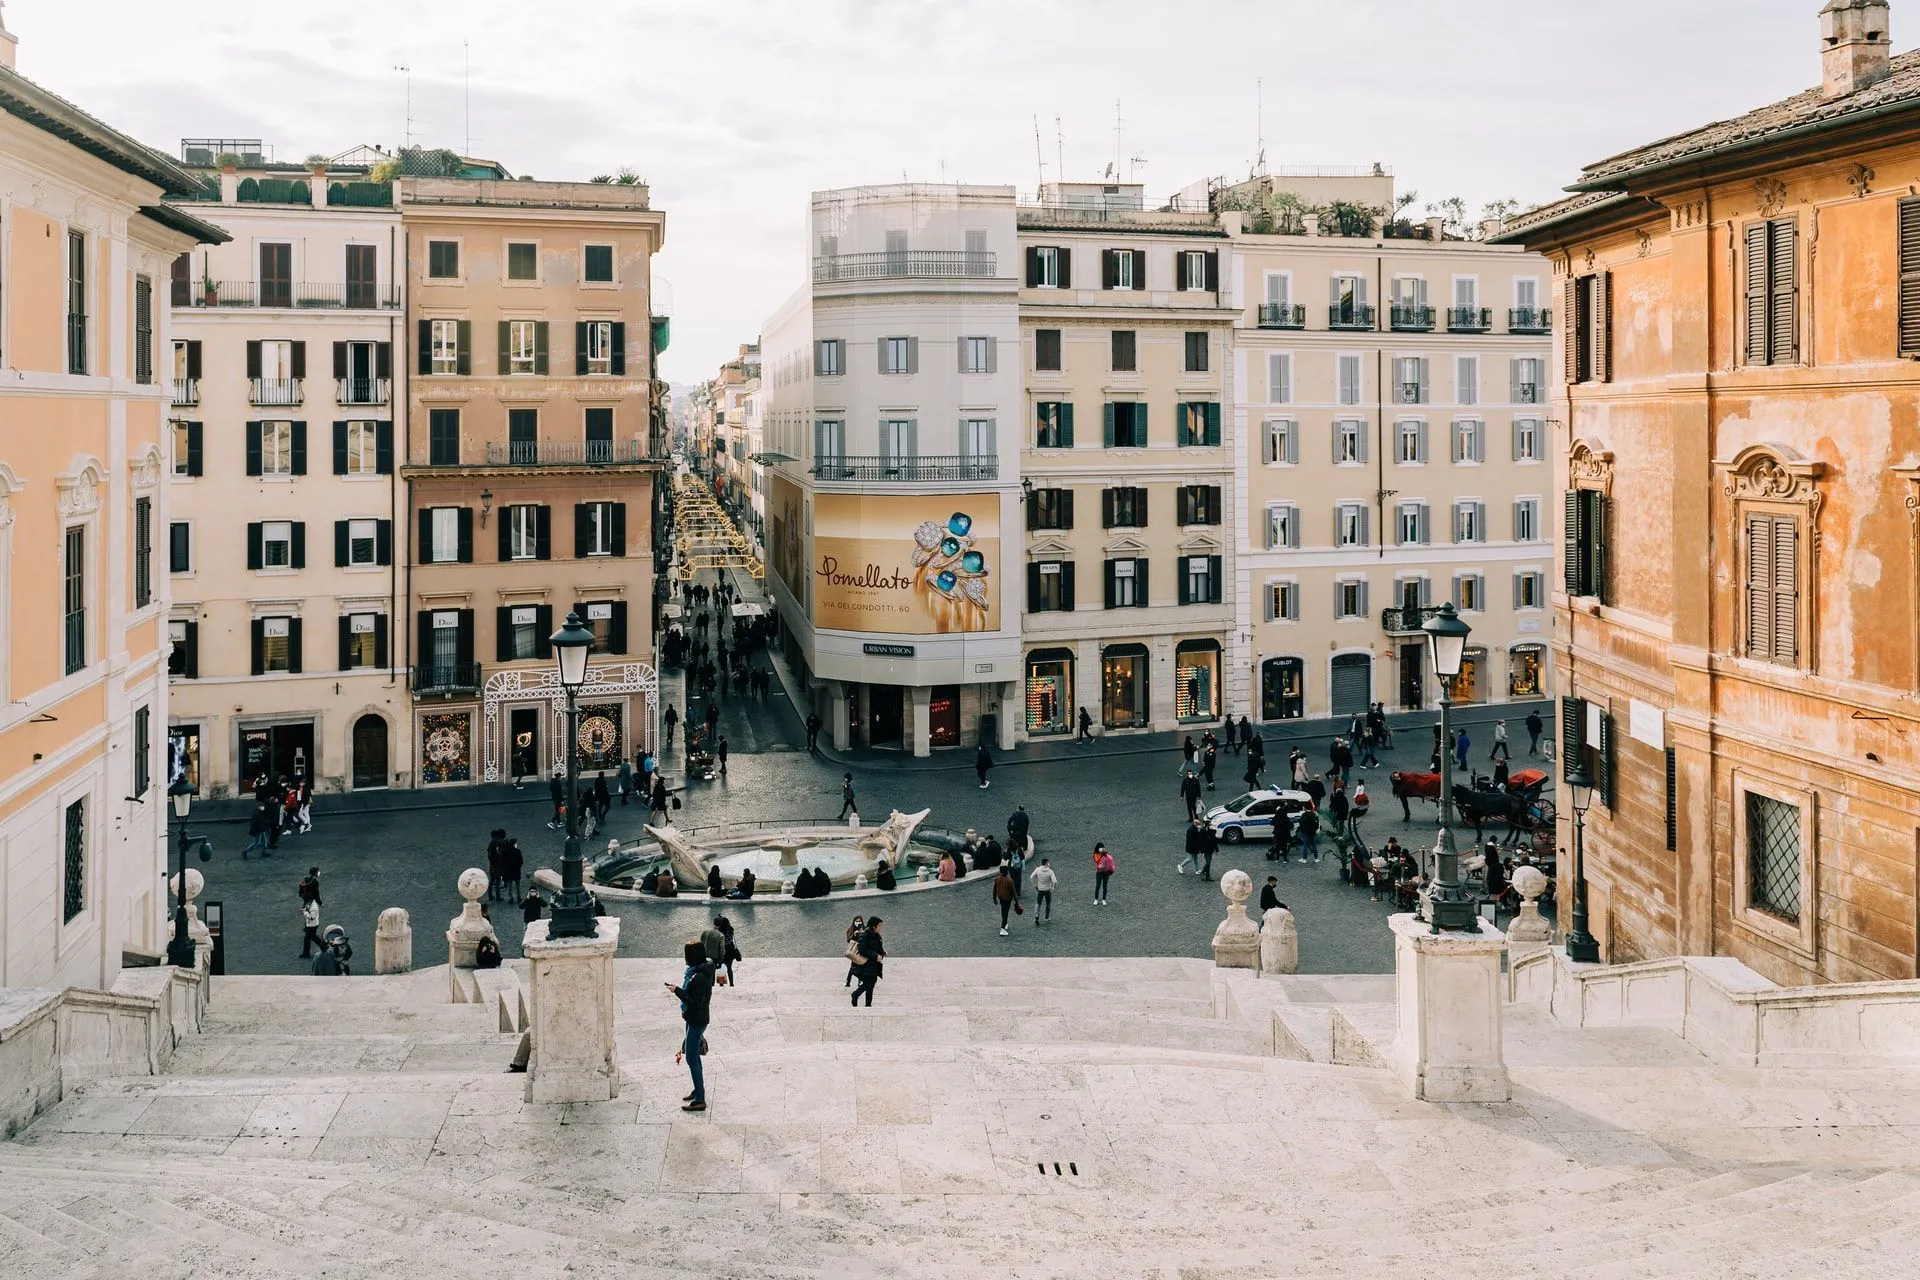 The architecture of the Spanish Steps represents the theatrical Baroque style.